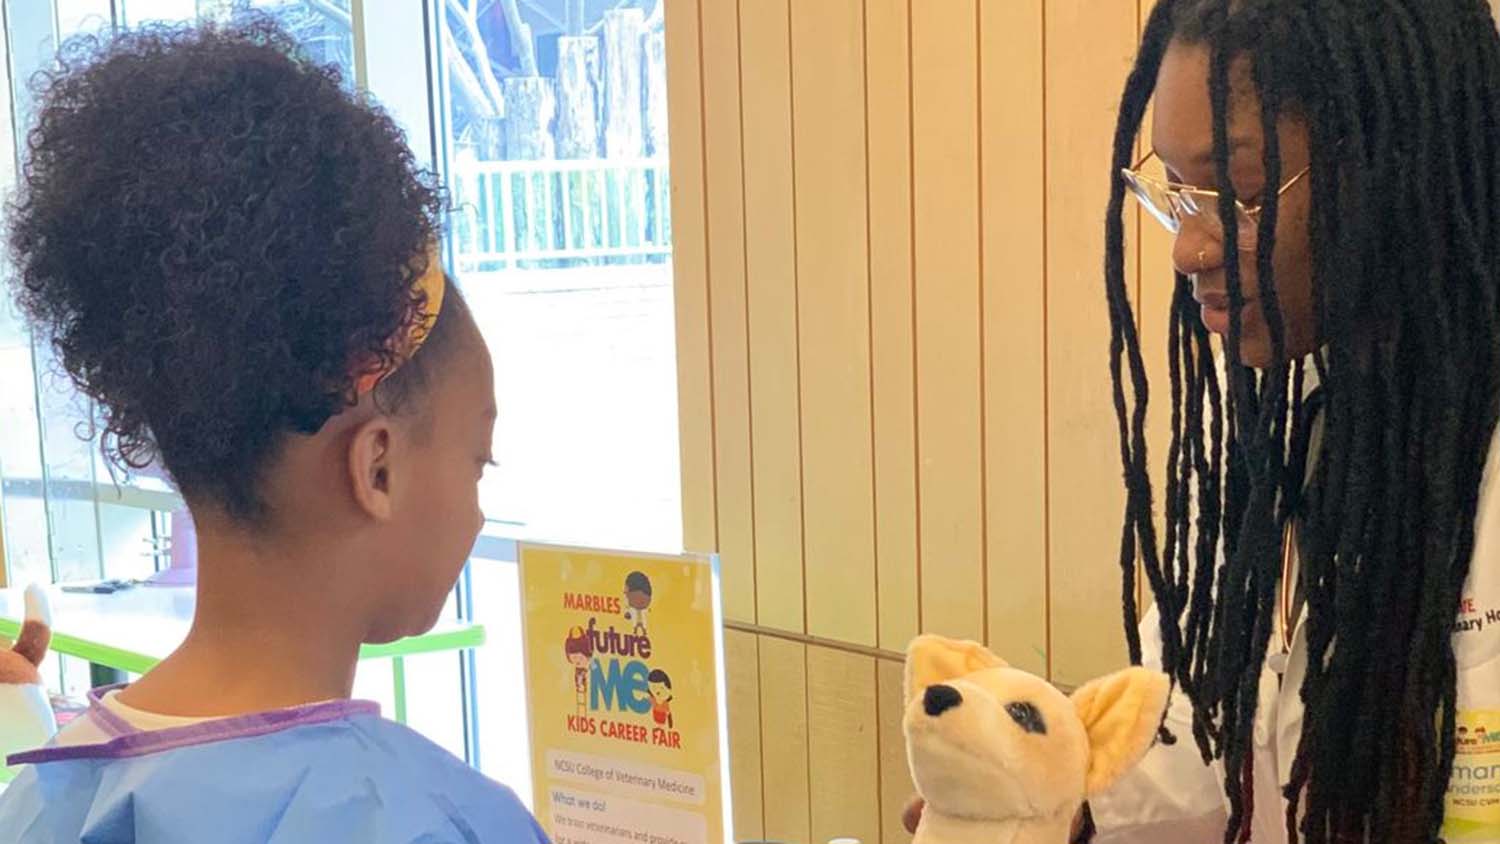 A veterinarian speaks with a young girl while holding a stuffed animal.